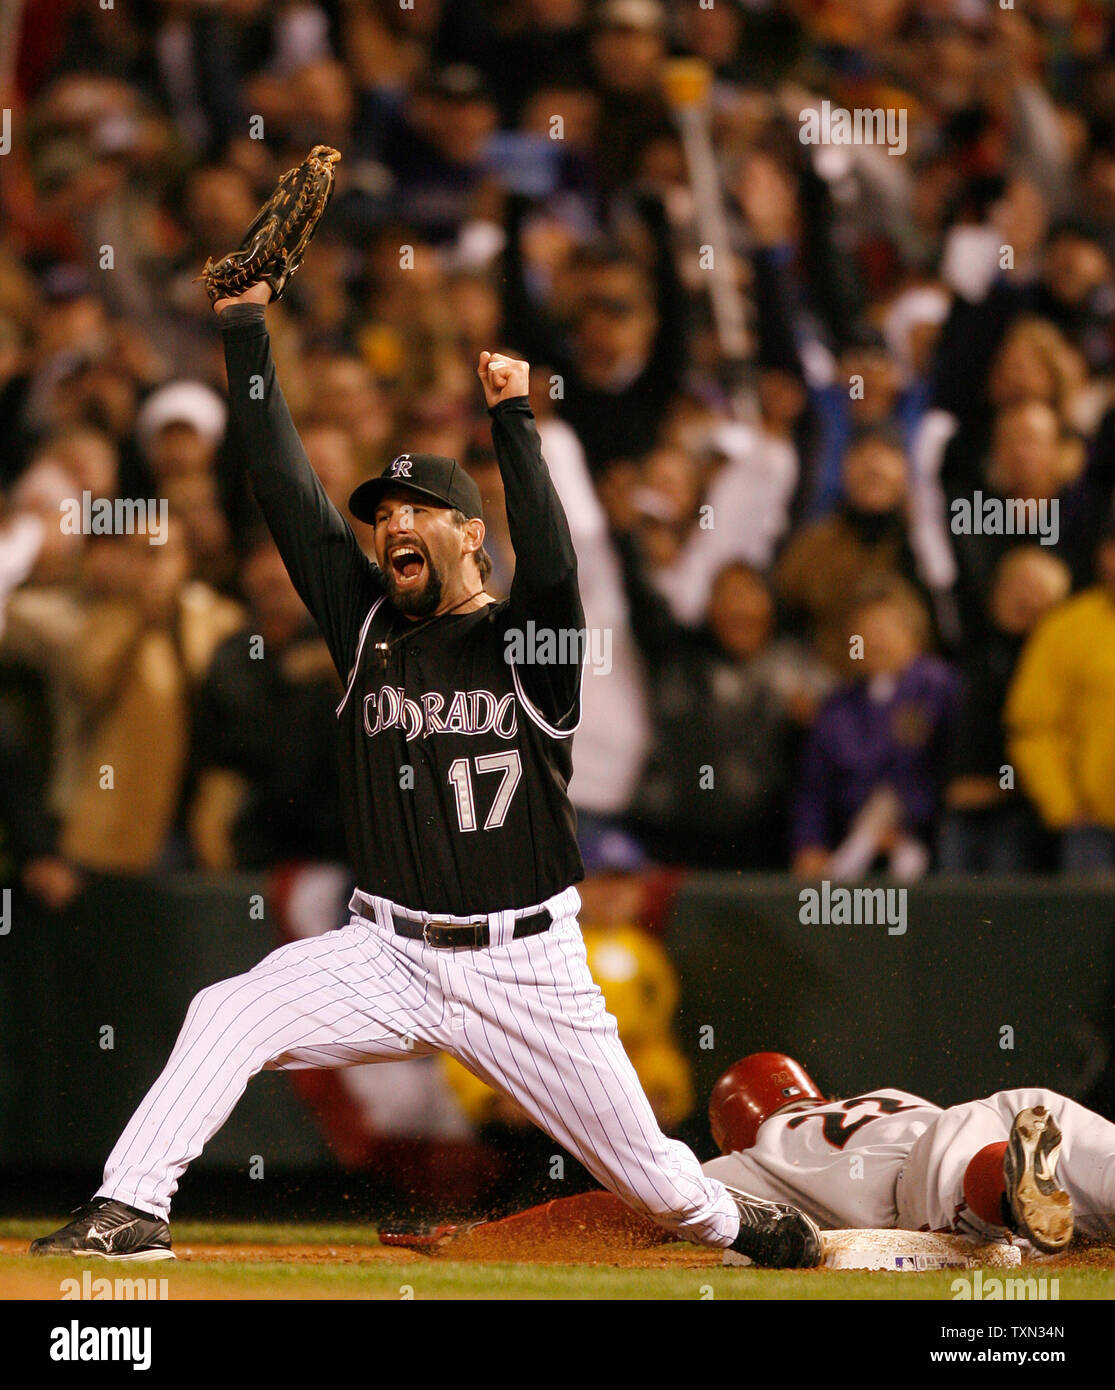 Colorado Rockies first baseman Todd Helton (L) celebrates after making the  final out against Arizona Diamondbacks left fielder Eric Byrnes during game  four of the National League Championship Series at Coors Field